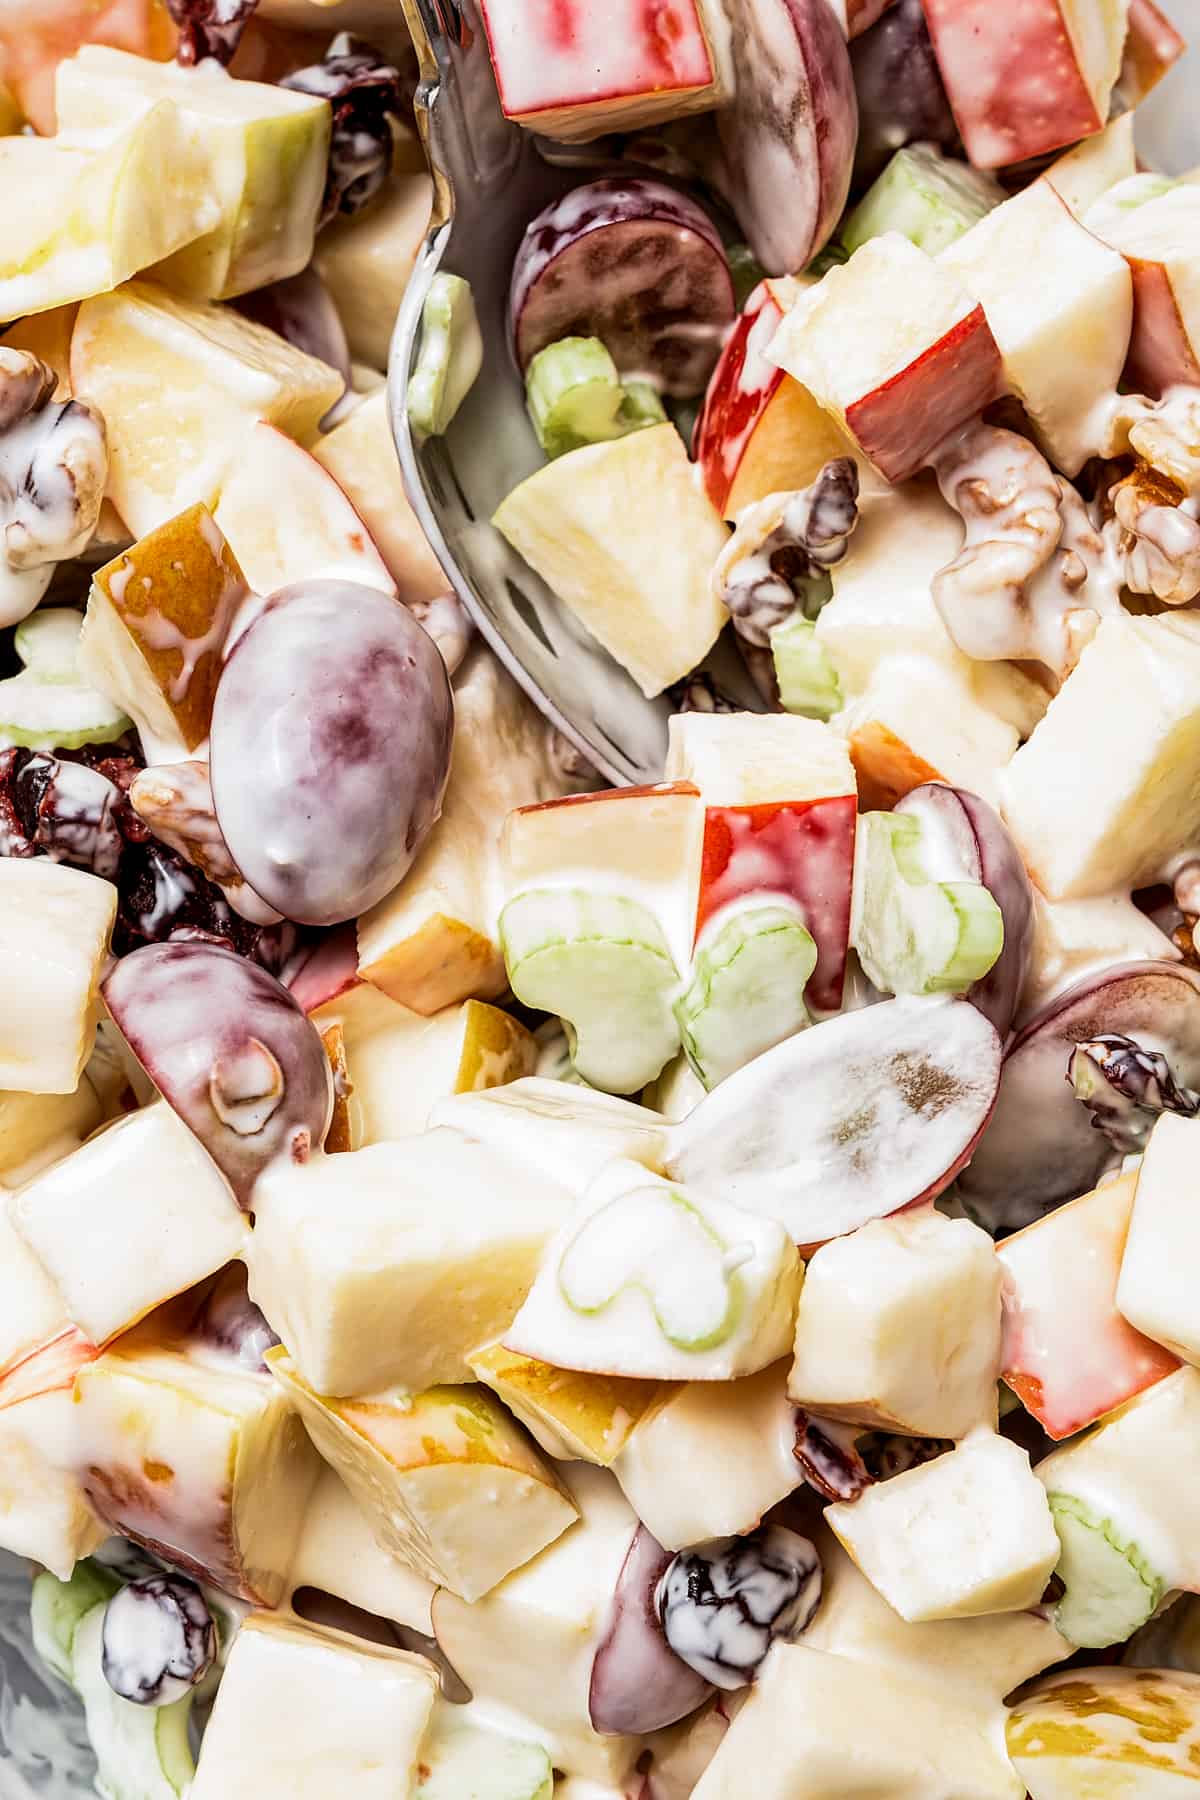 Close-up shot of Waldorf salad, showing the texture of the ingredients and dressing.